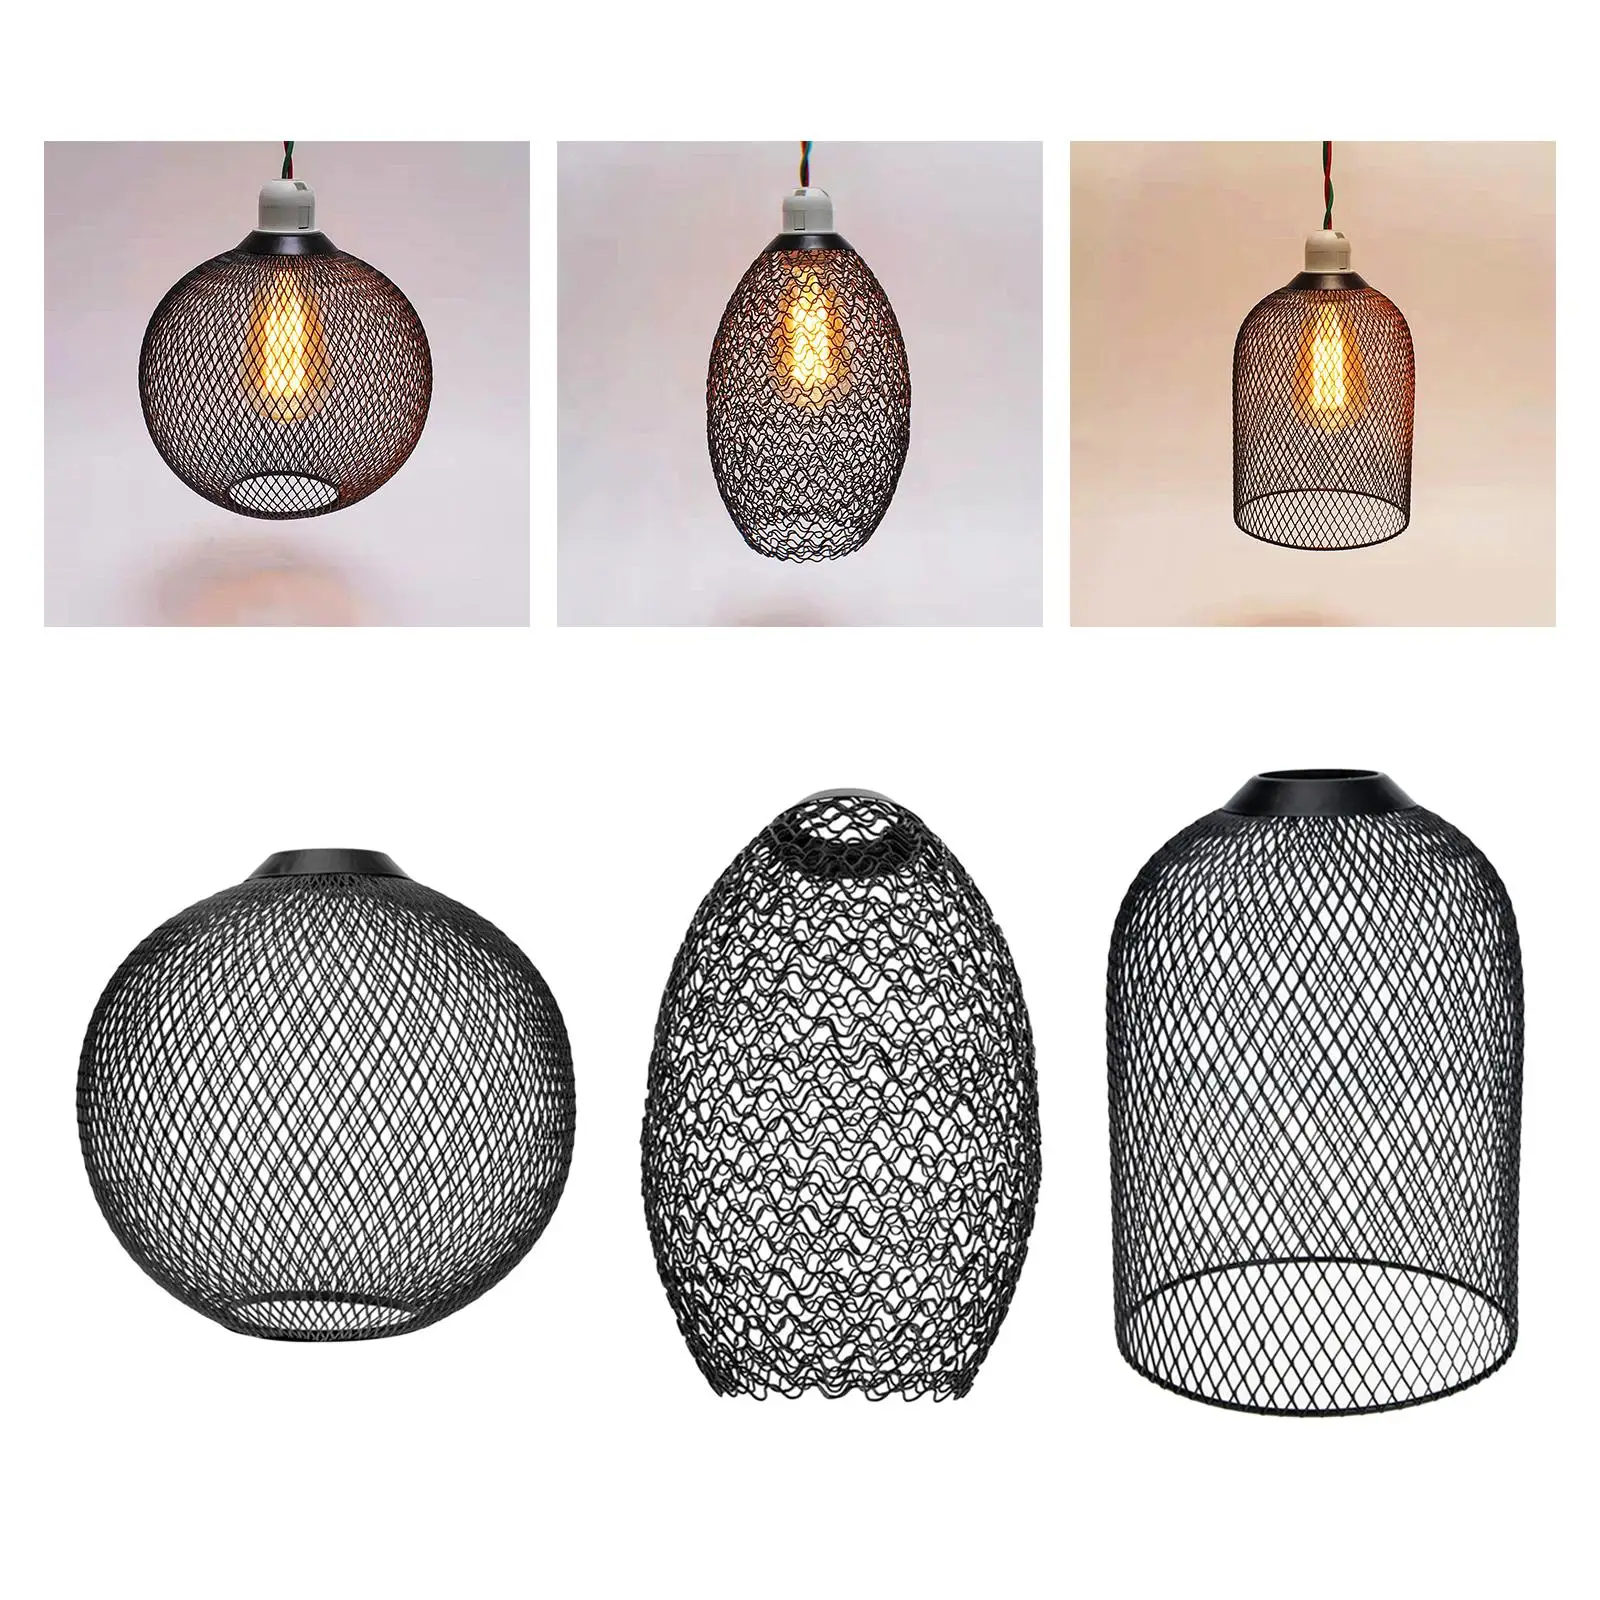 Modern Metal Chandelier Lampshade Ceiling Pendant Light Shade Lamp Shade Home Cafe Decor